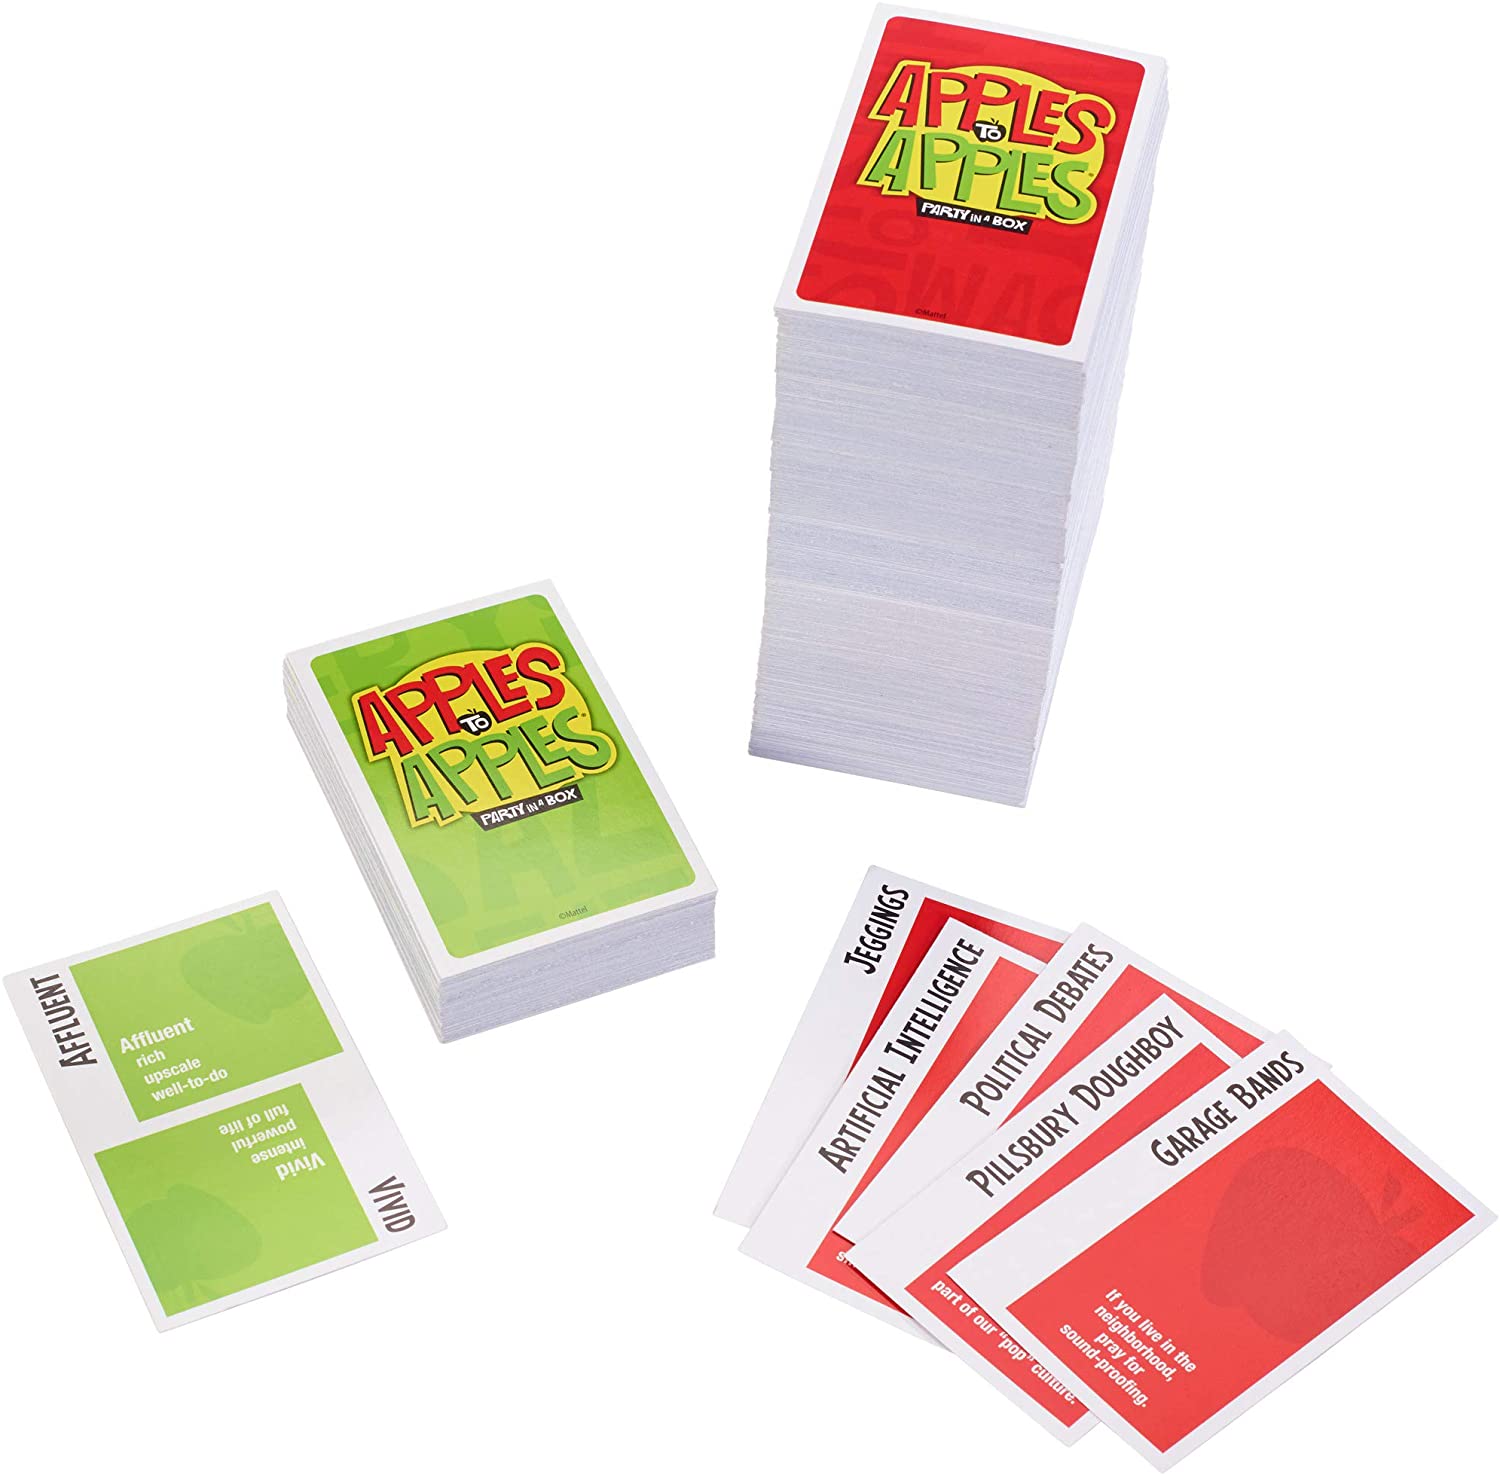 Mattel Apples to Apples Party in a Box Game - sctoyswholesale